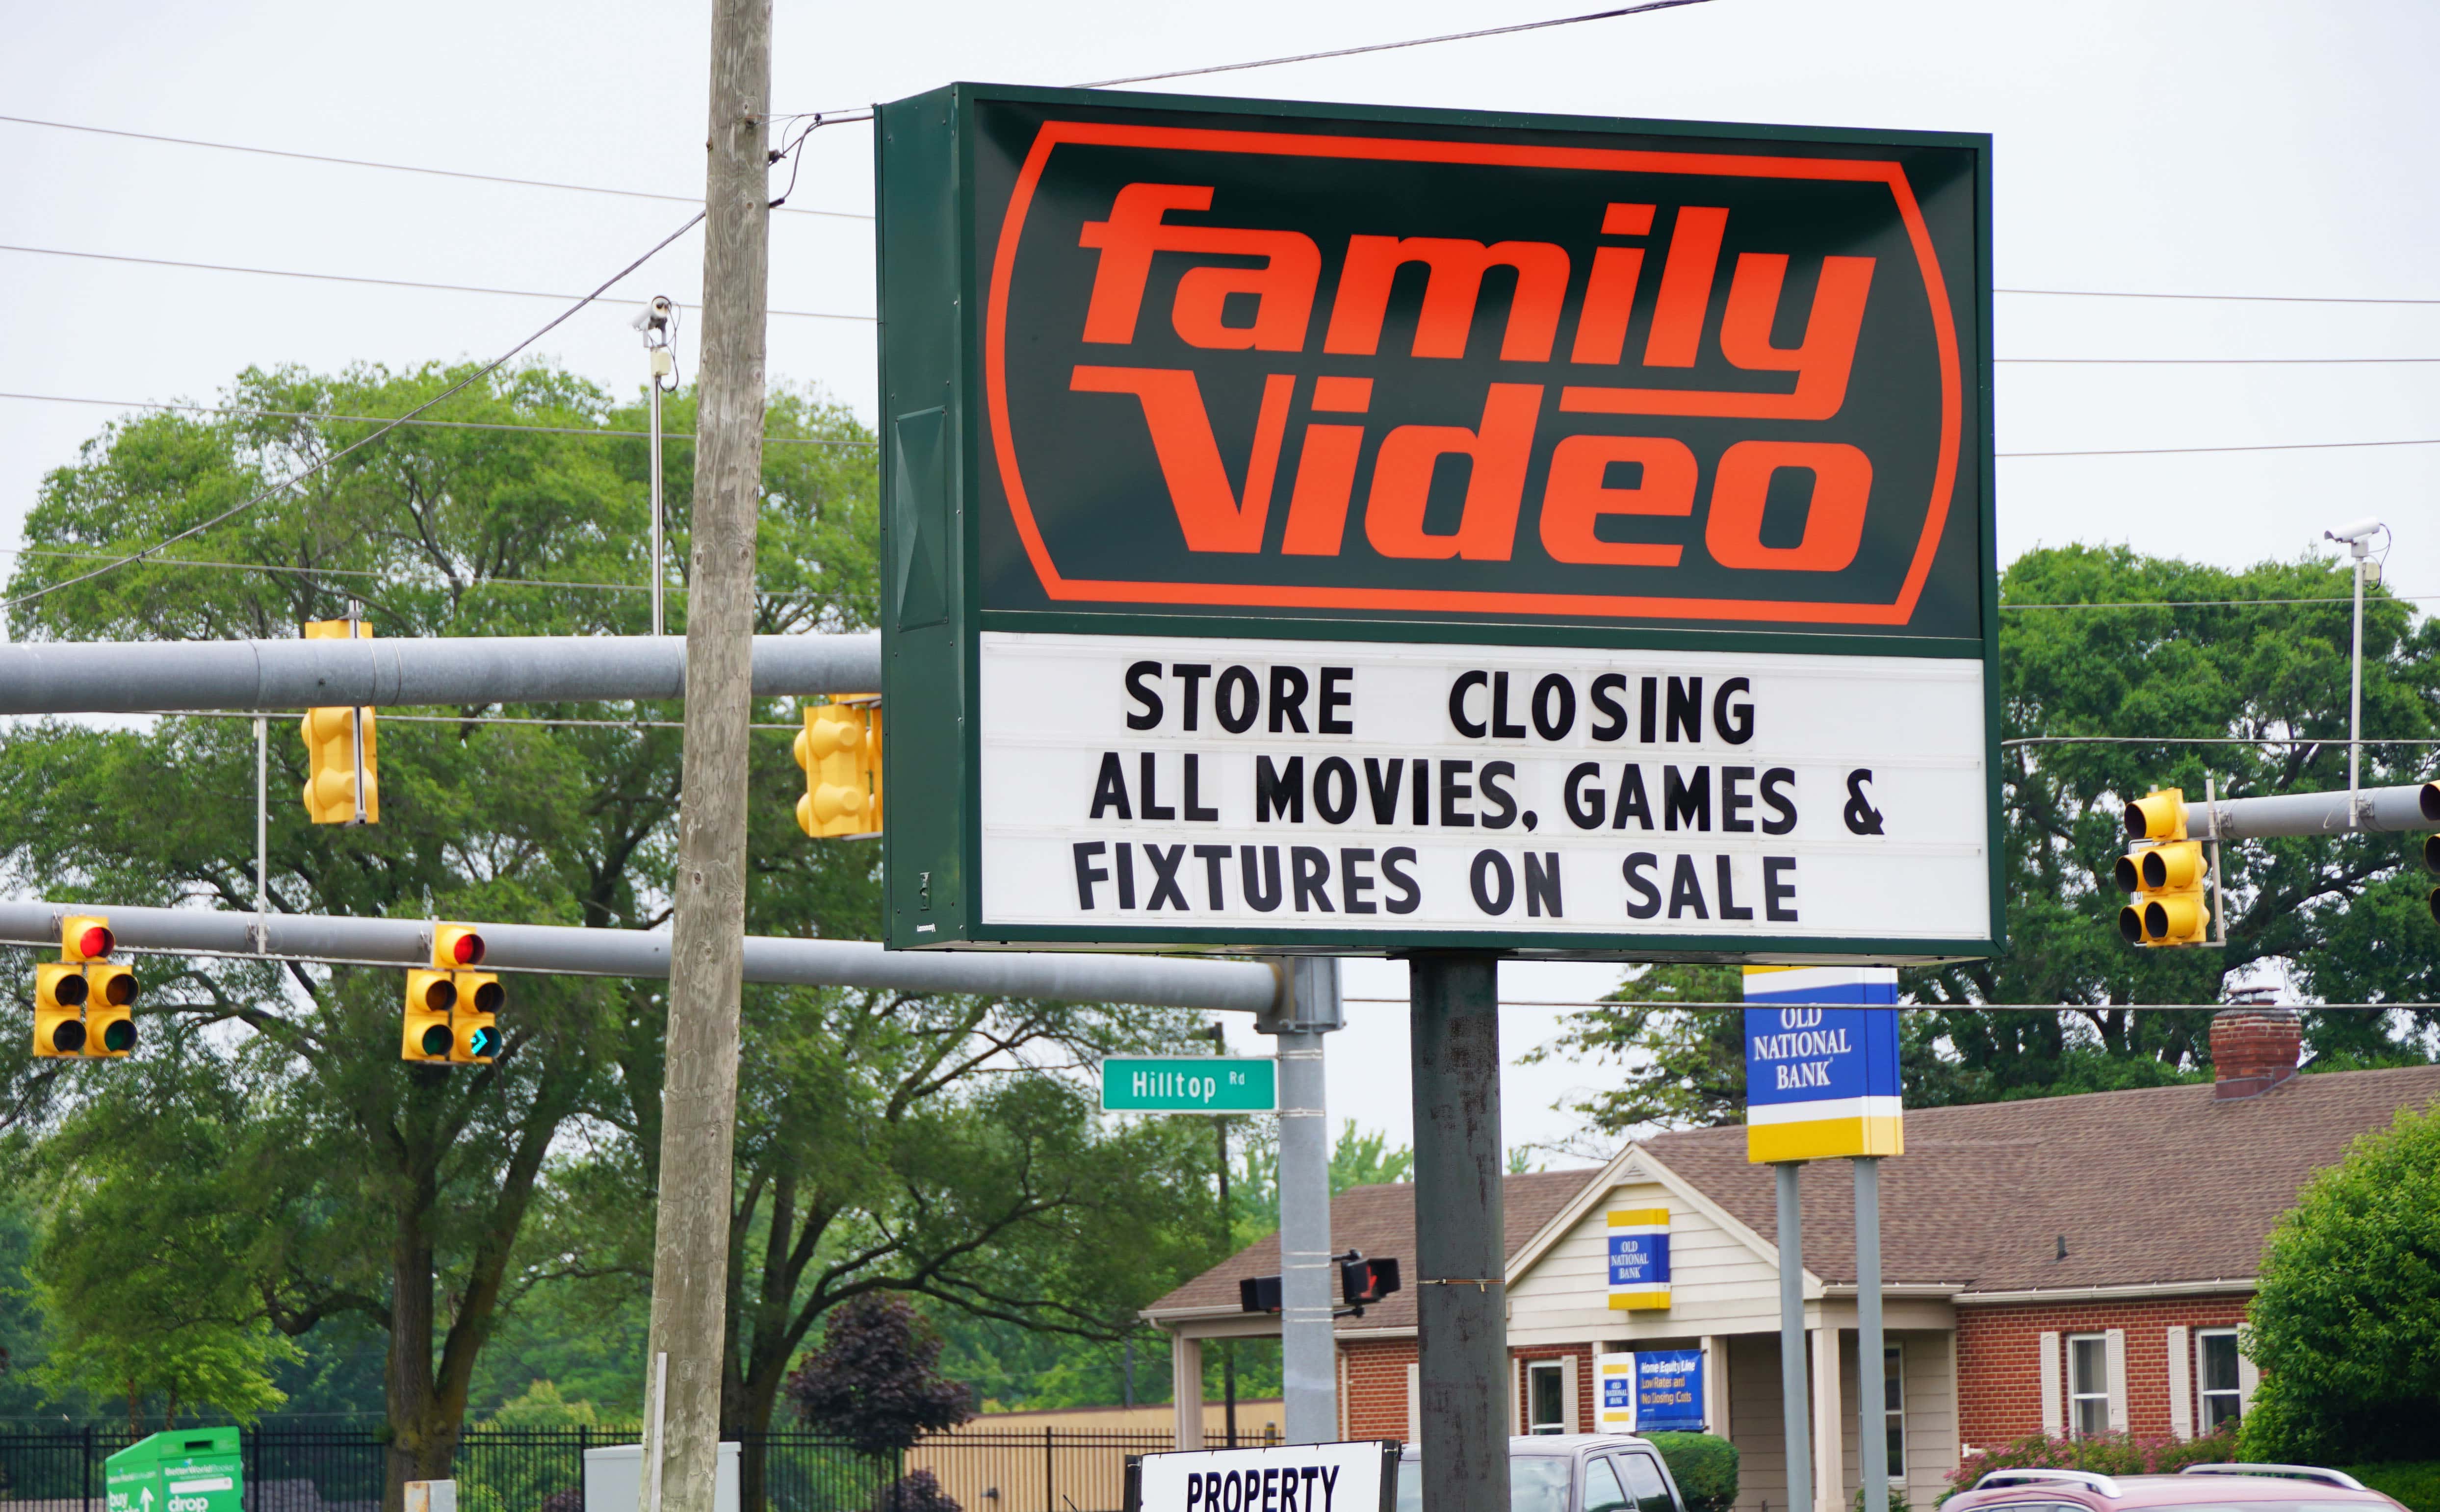 Dollar General Confirms Opening in Former Family Video Location in St